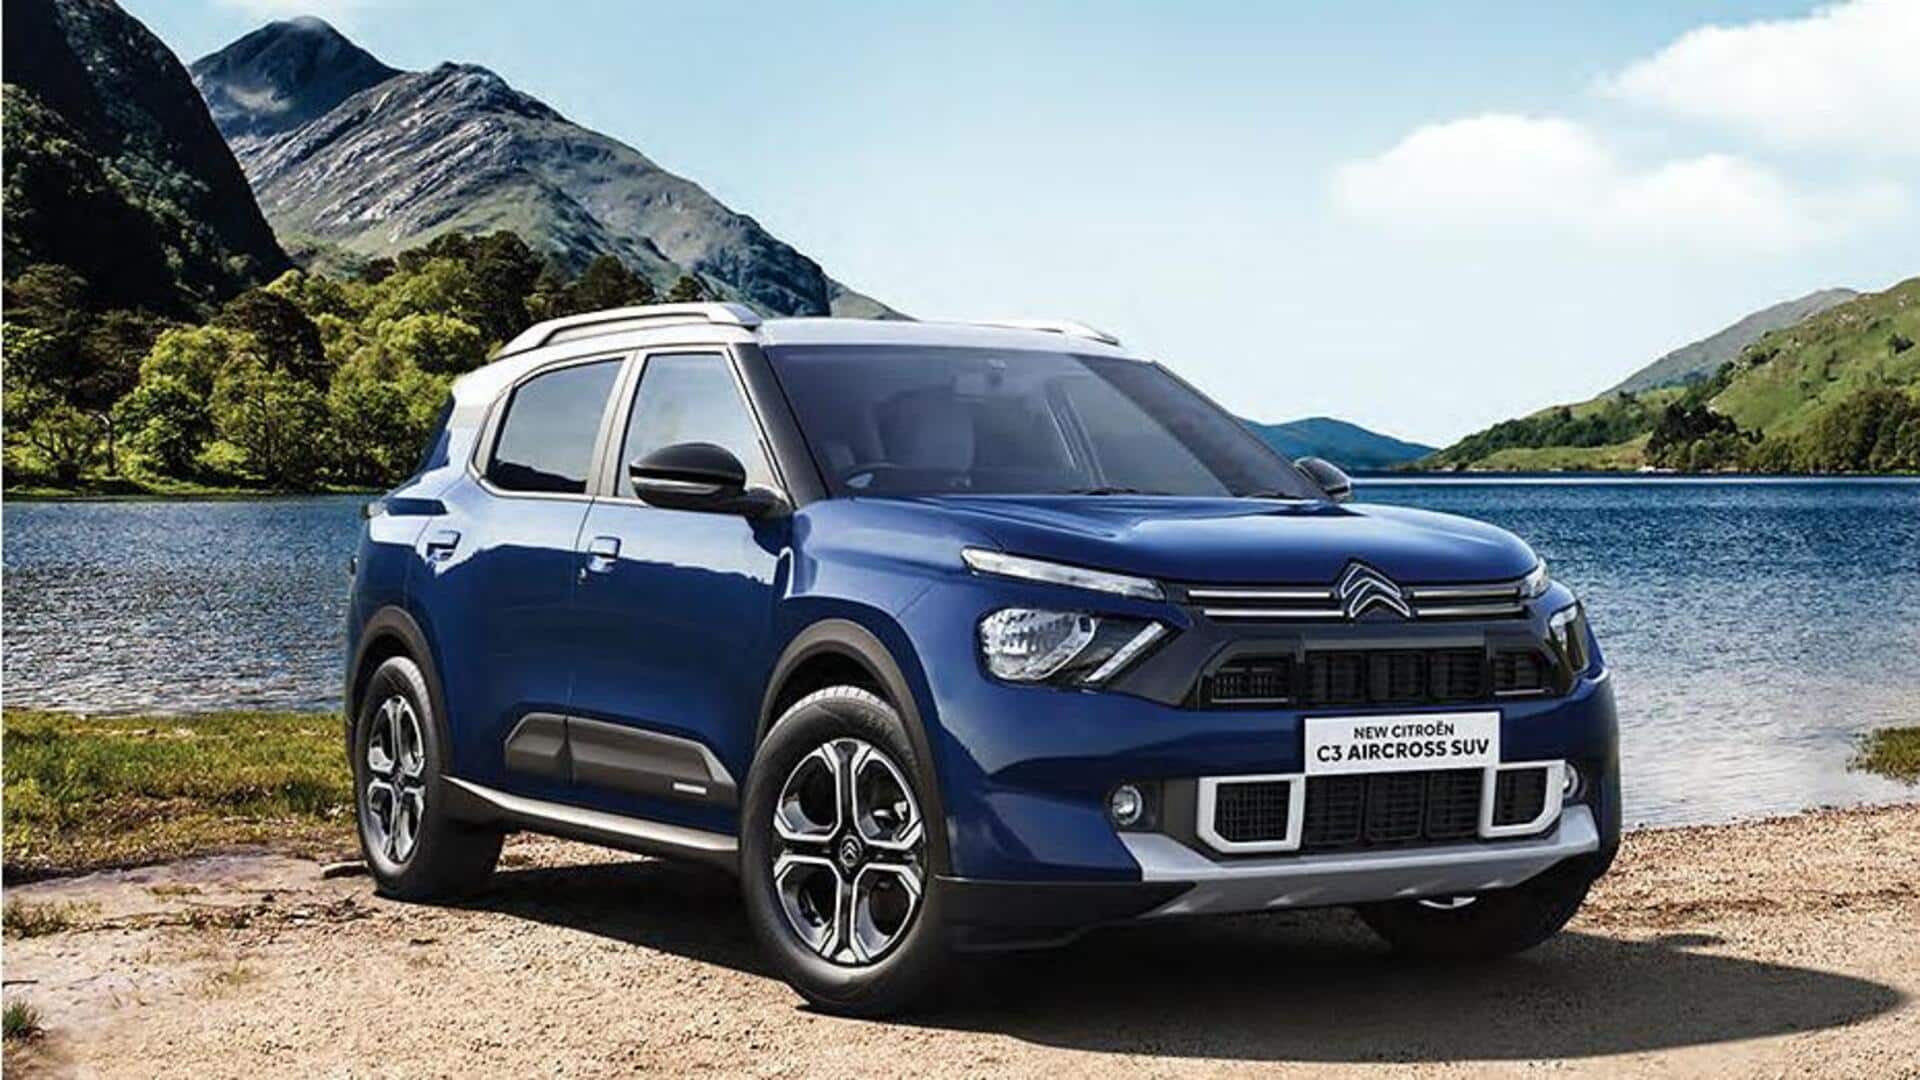 Citroen C3 Aircross (automatic) goes official at Rs. 12.9 lakh